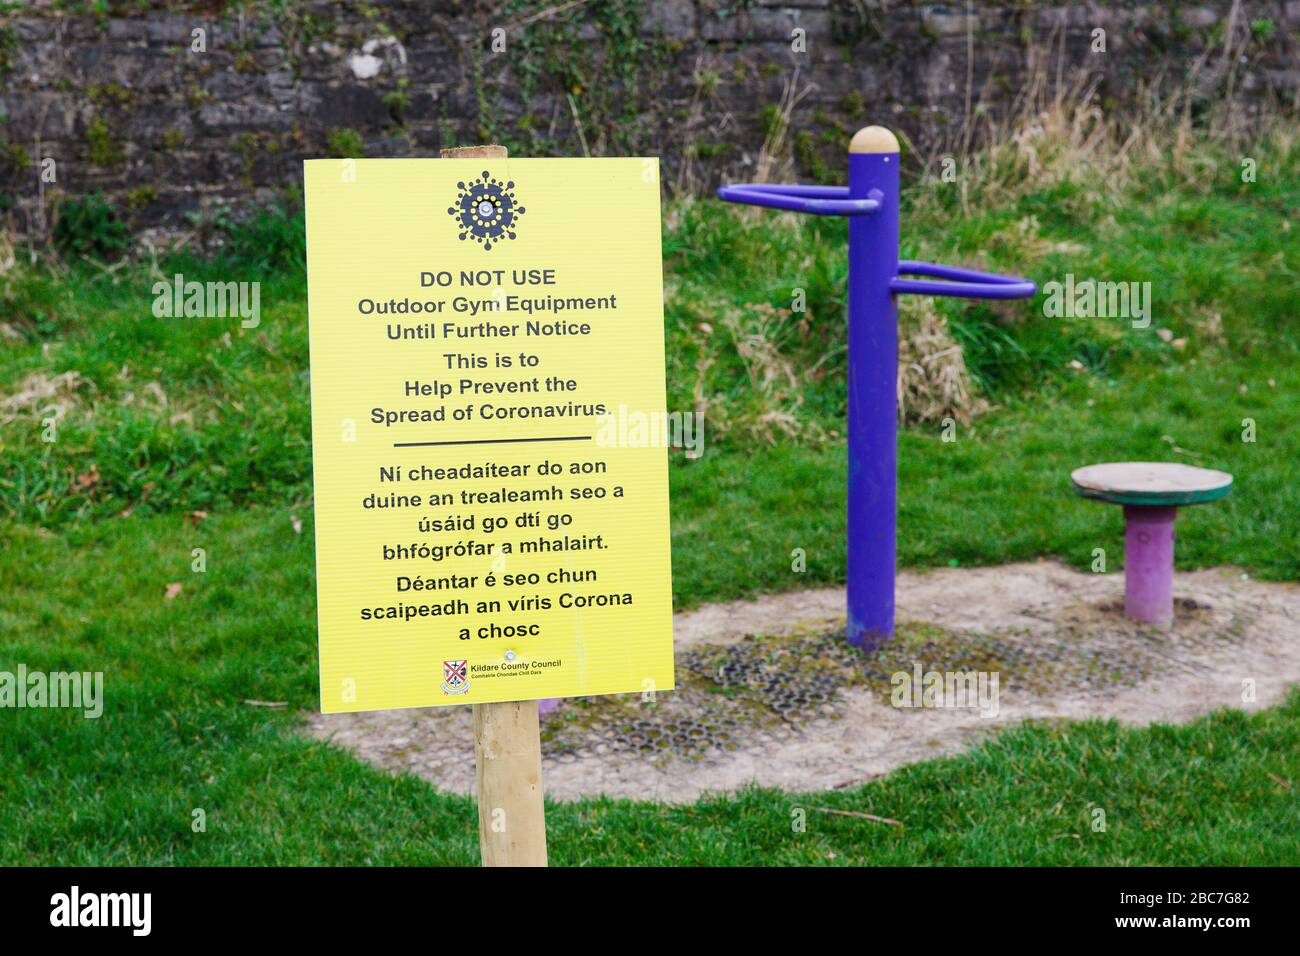 Warning sign prohibiting use of the outdoor fitness equipment to help prevent spread of Covid-19 (coronavirus). Maynooth, Kildare, Ireland Stock Photo